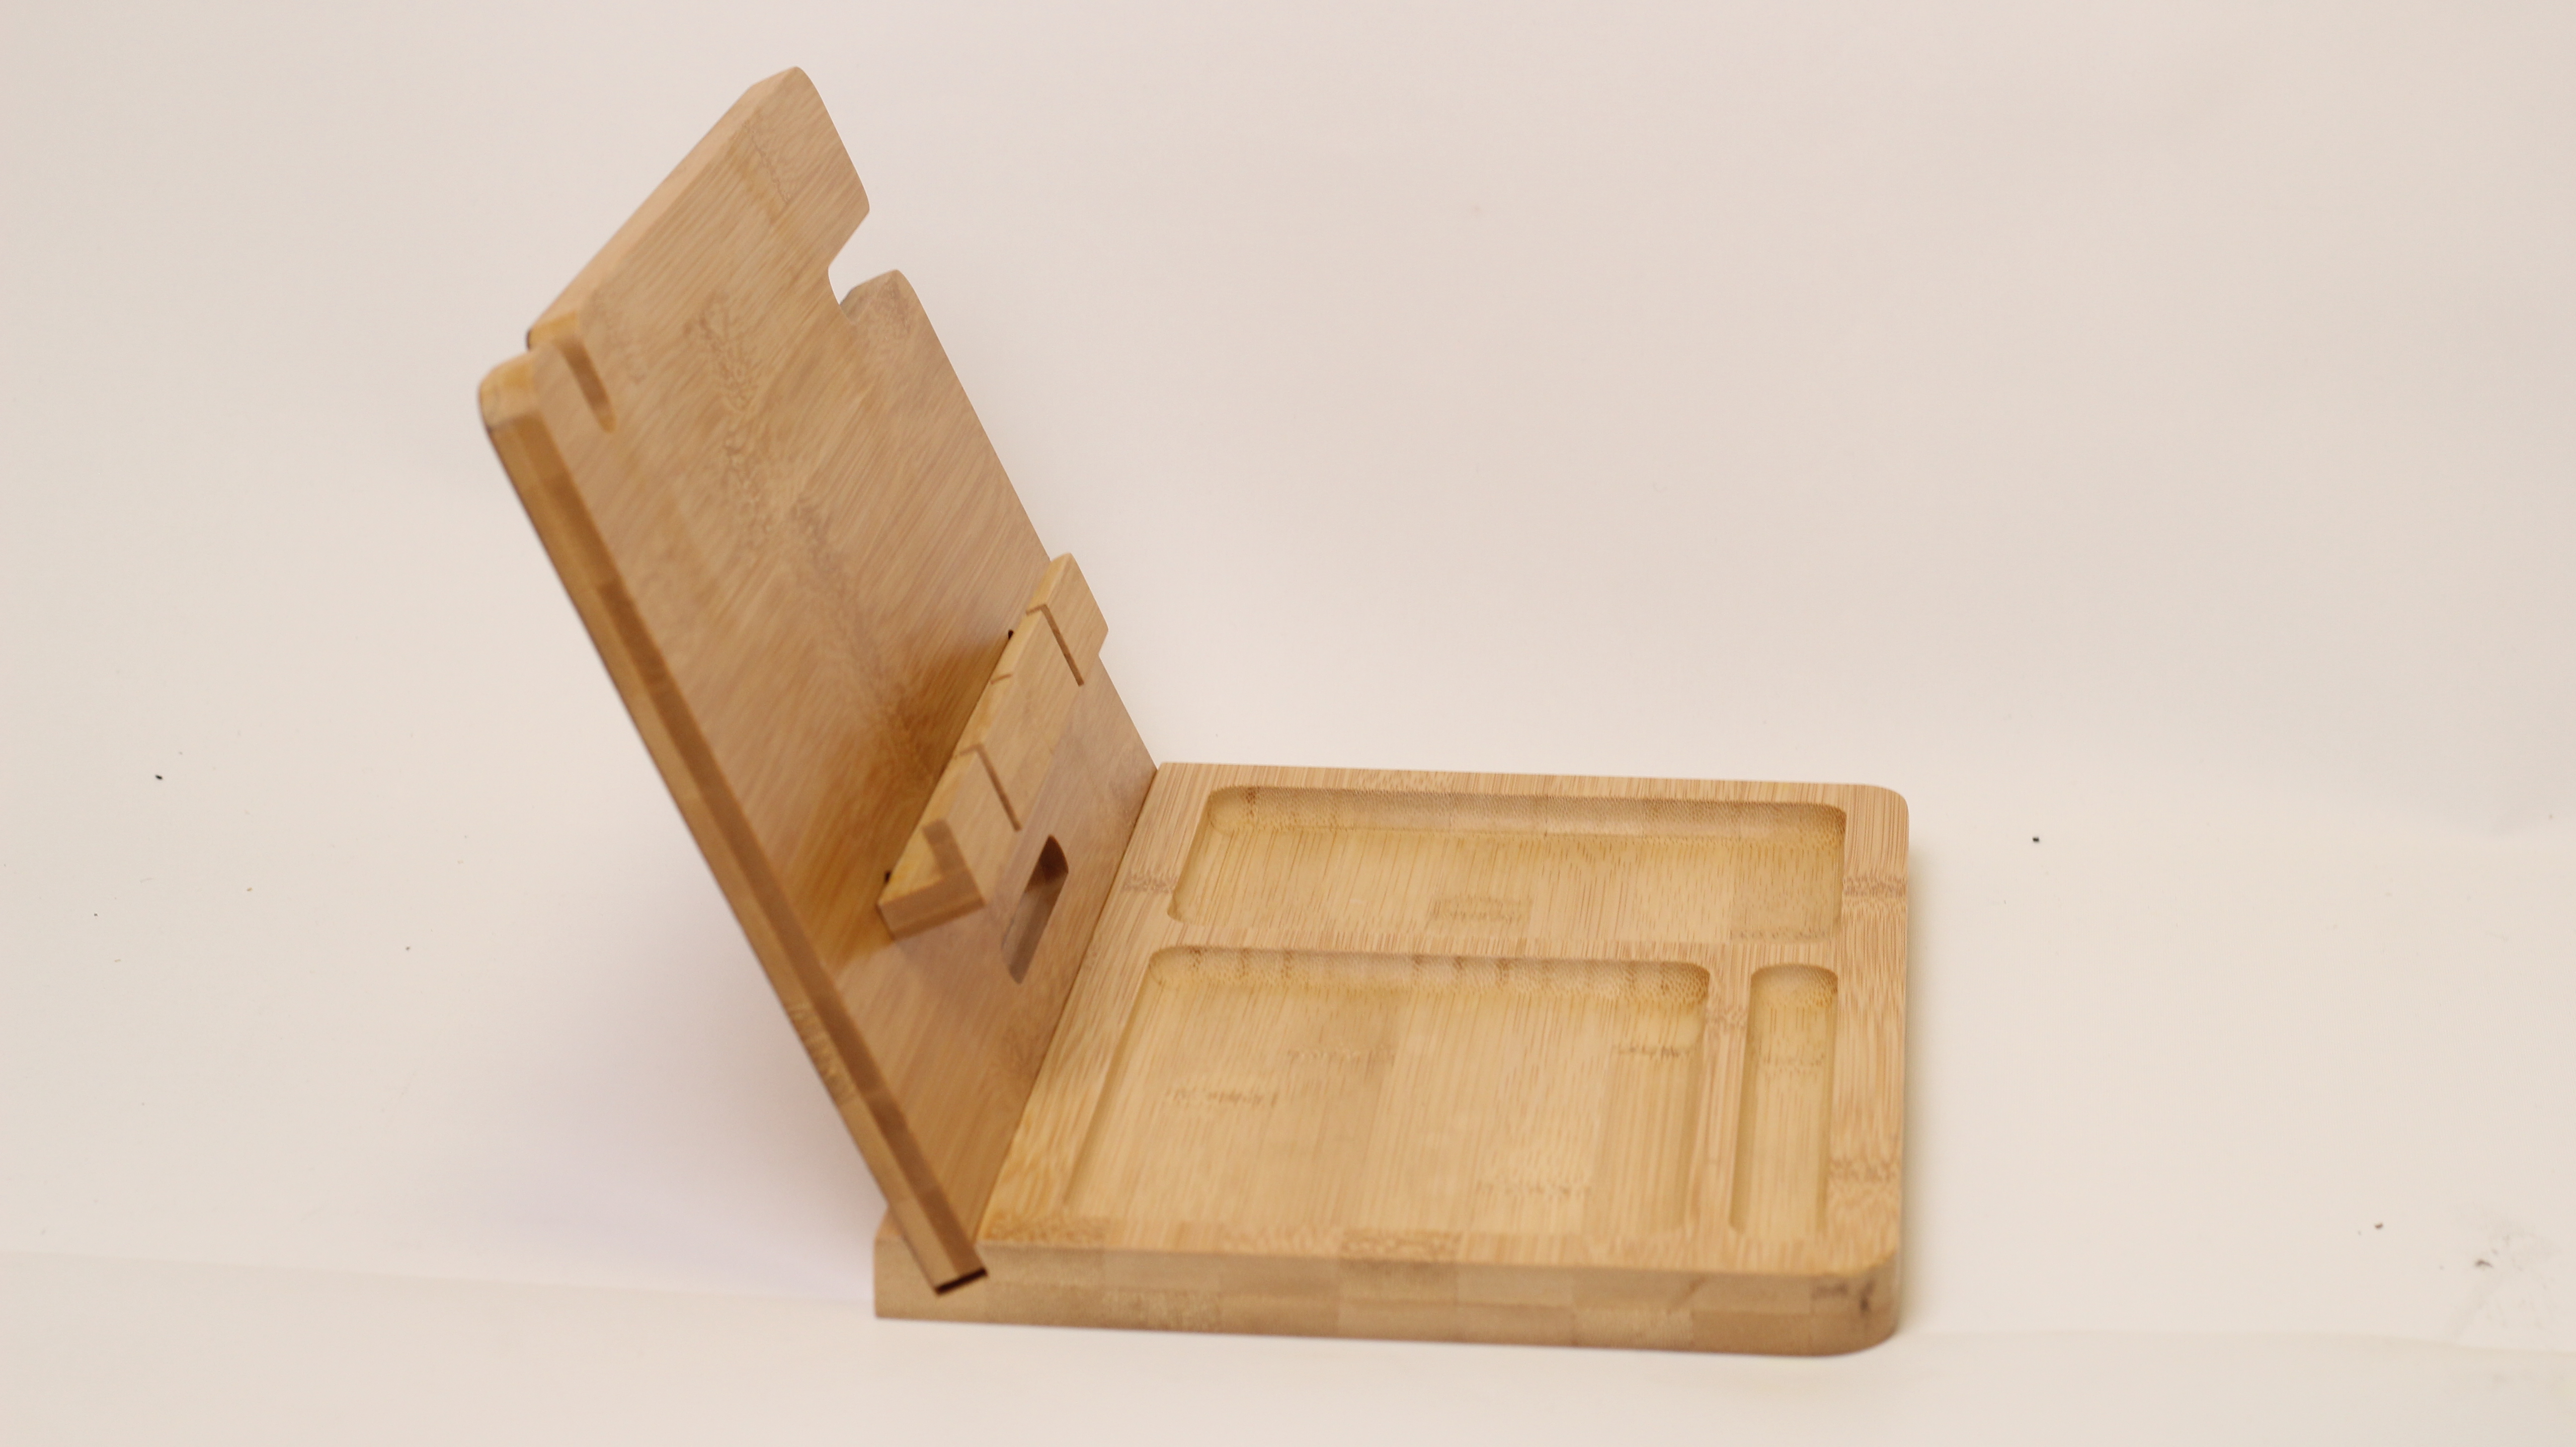 Bamboo display stand mobile phone holder